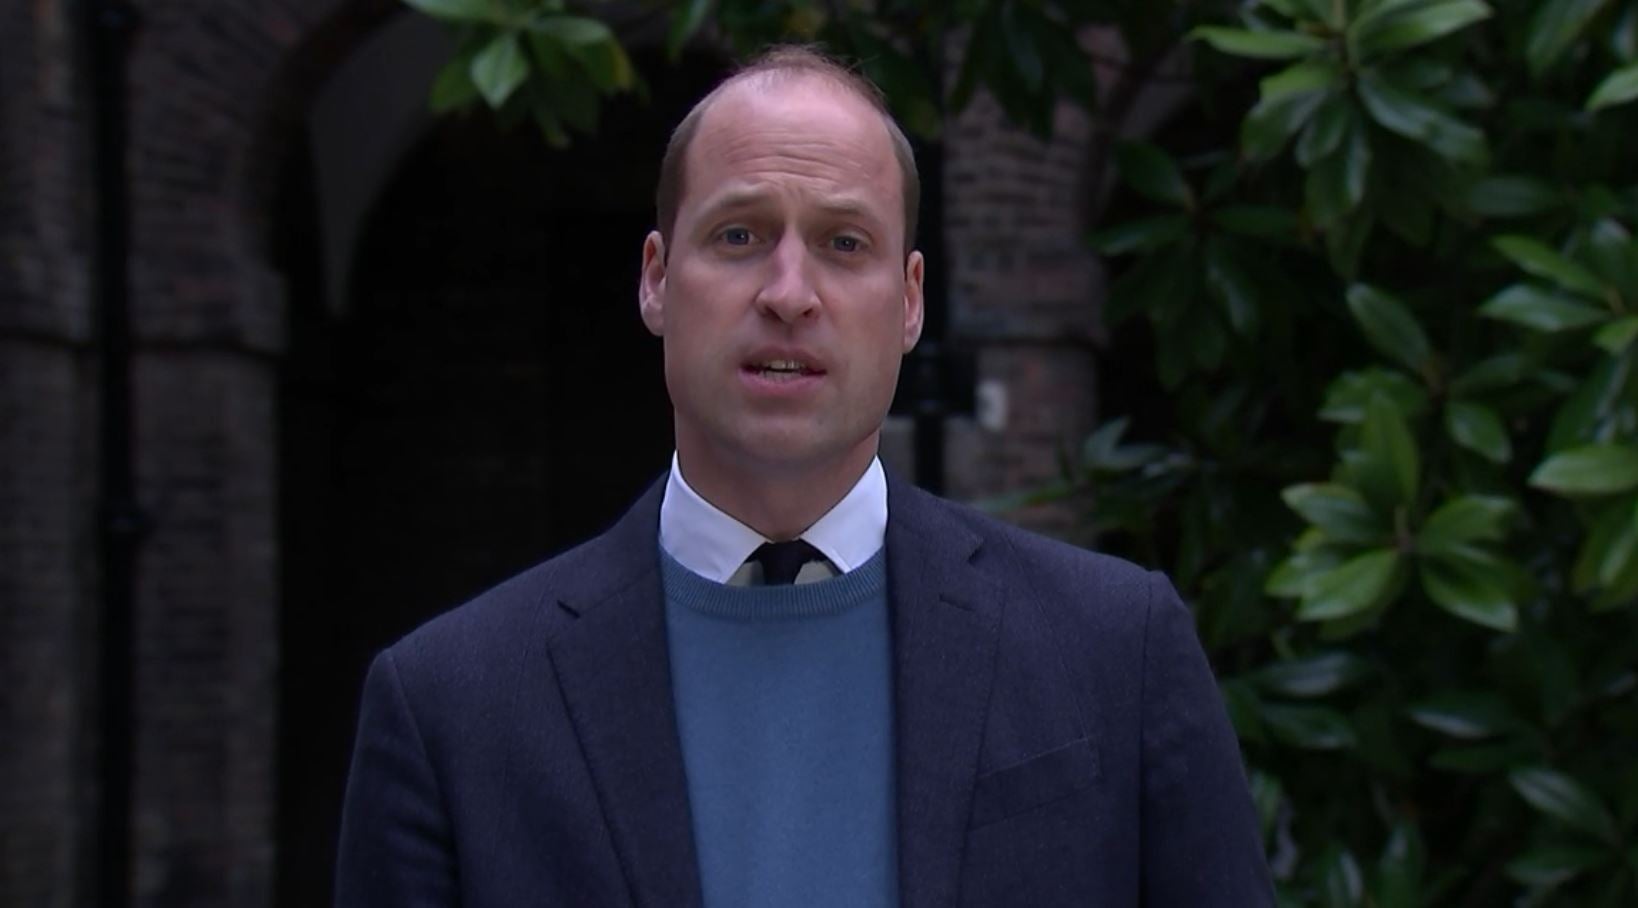 William previously criticised the BBC for its failings around his mother’s Panorama interview (ITN/PA)